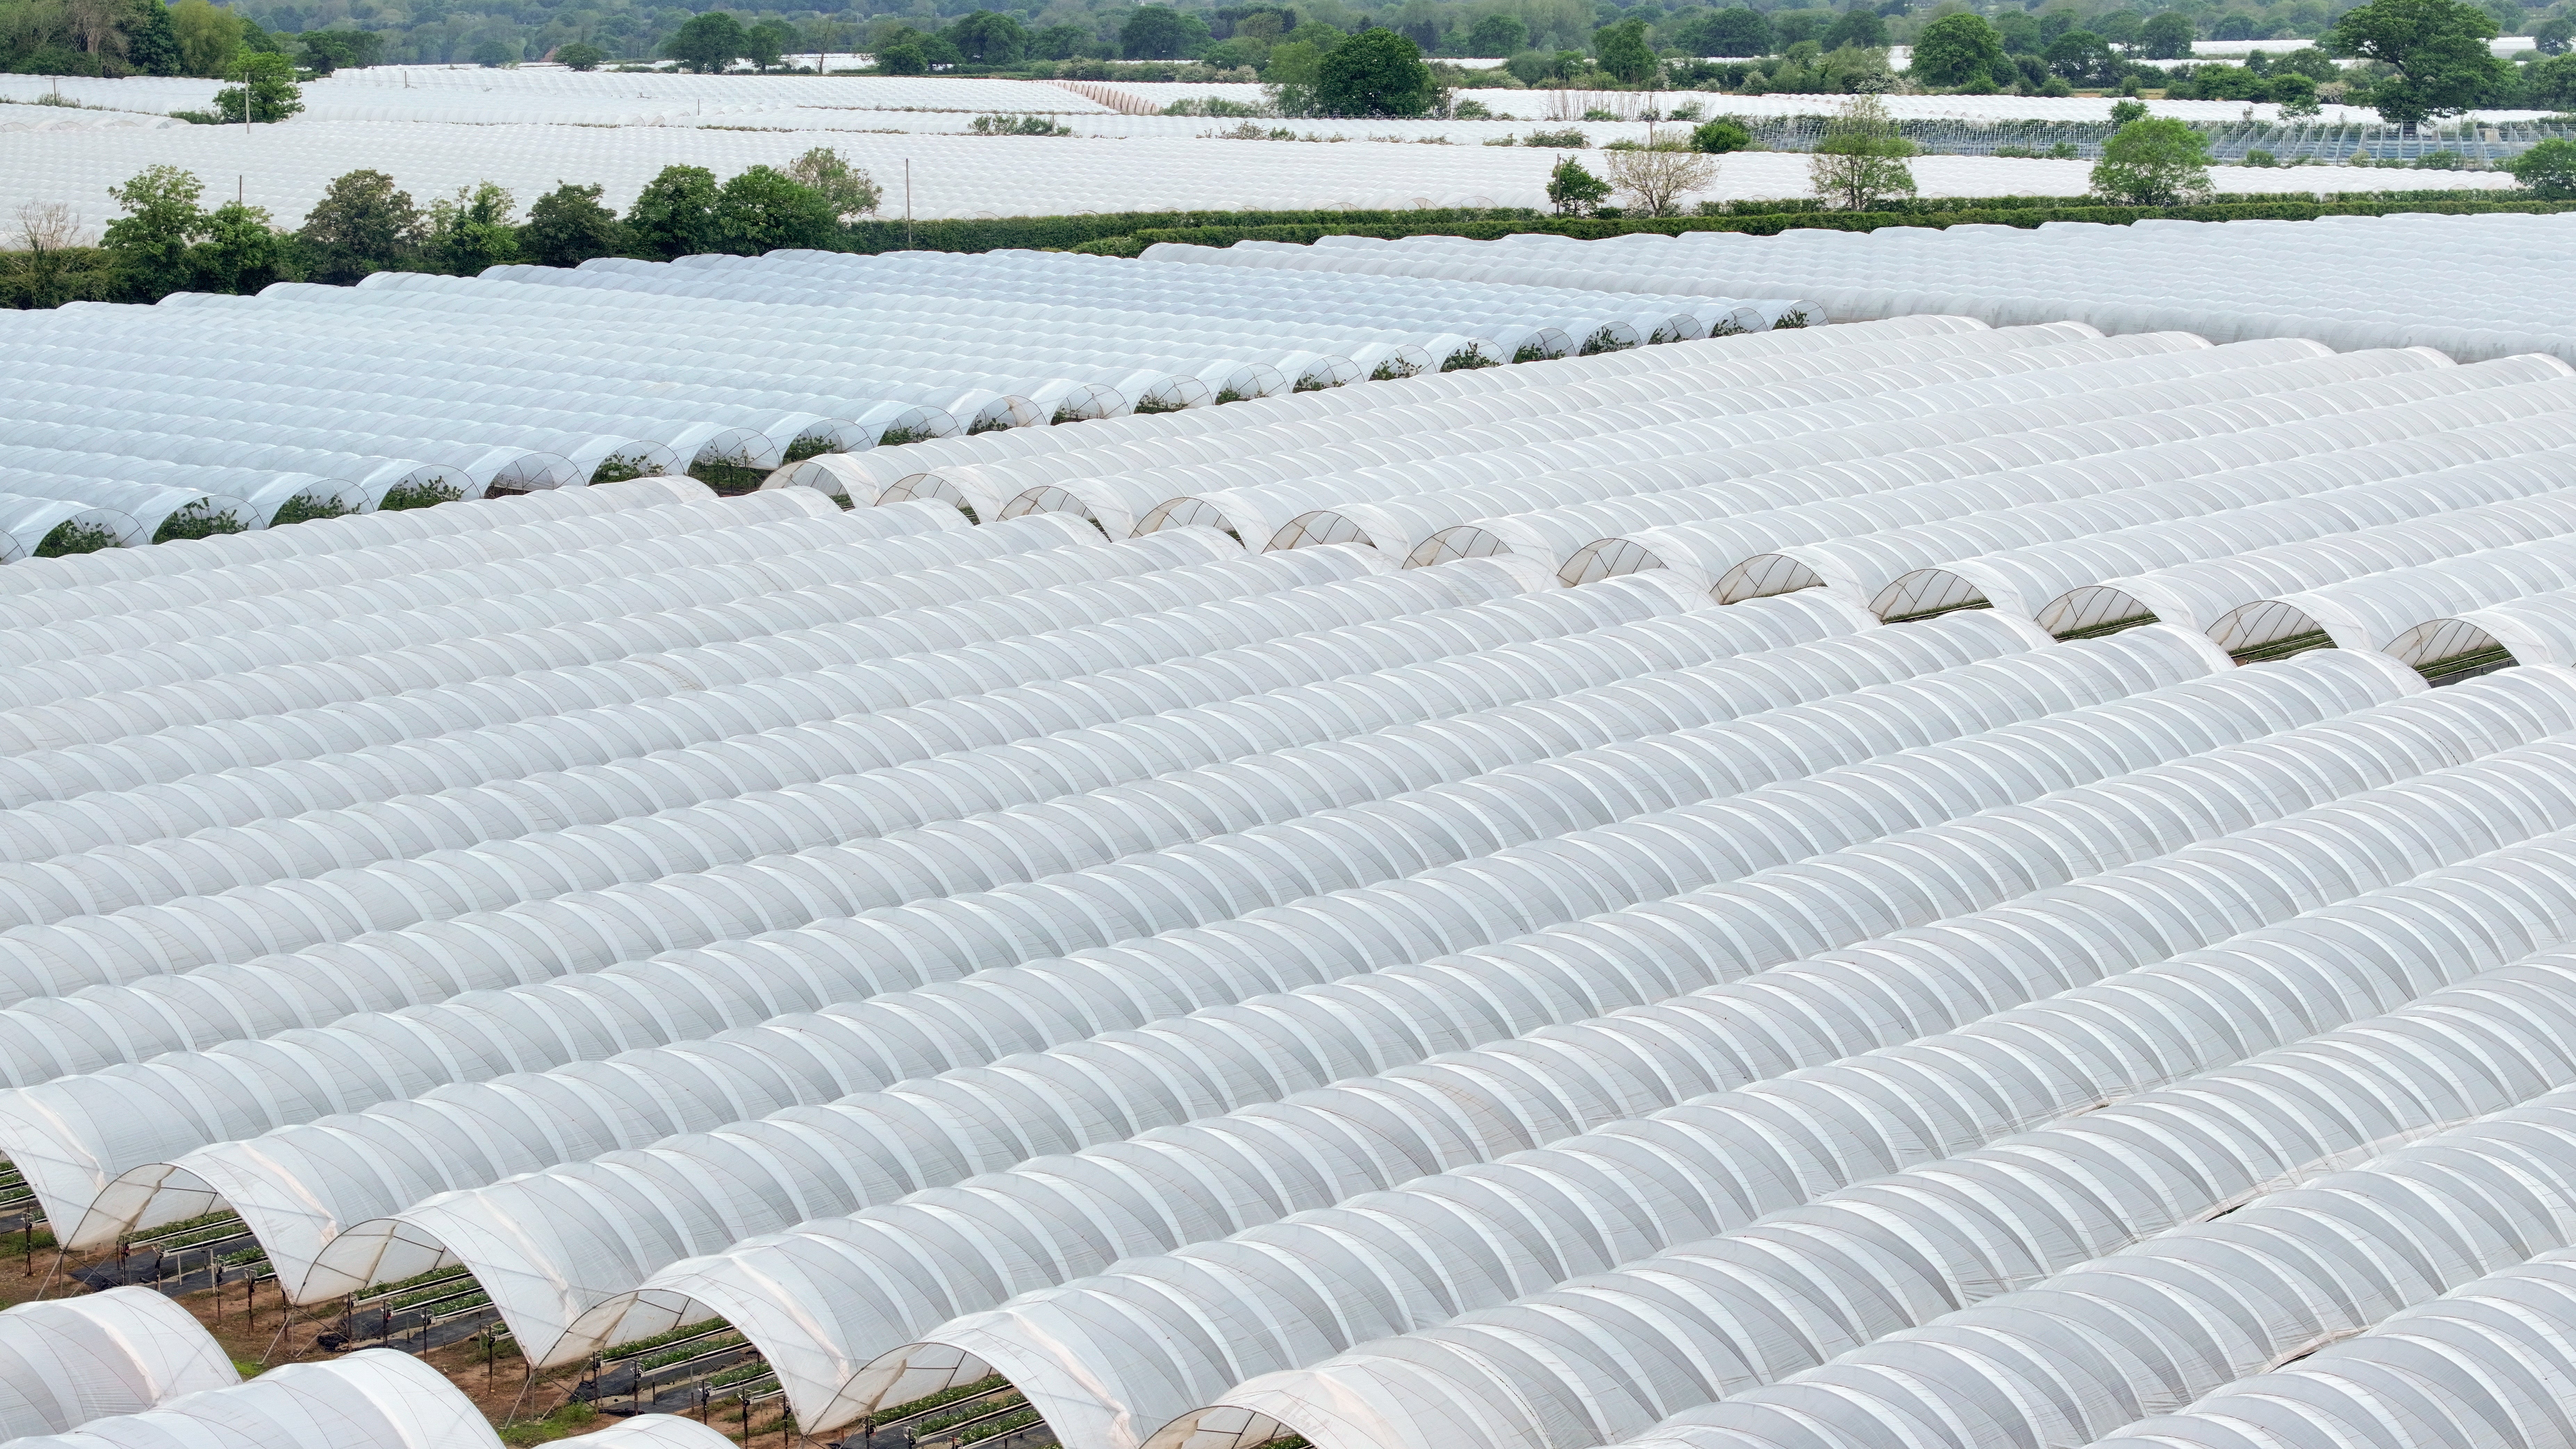 Workers described hot and difficult working conditions inside polytunnels on UK farms